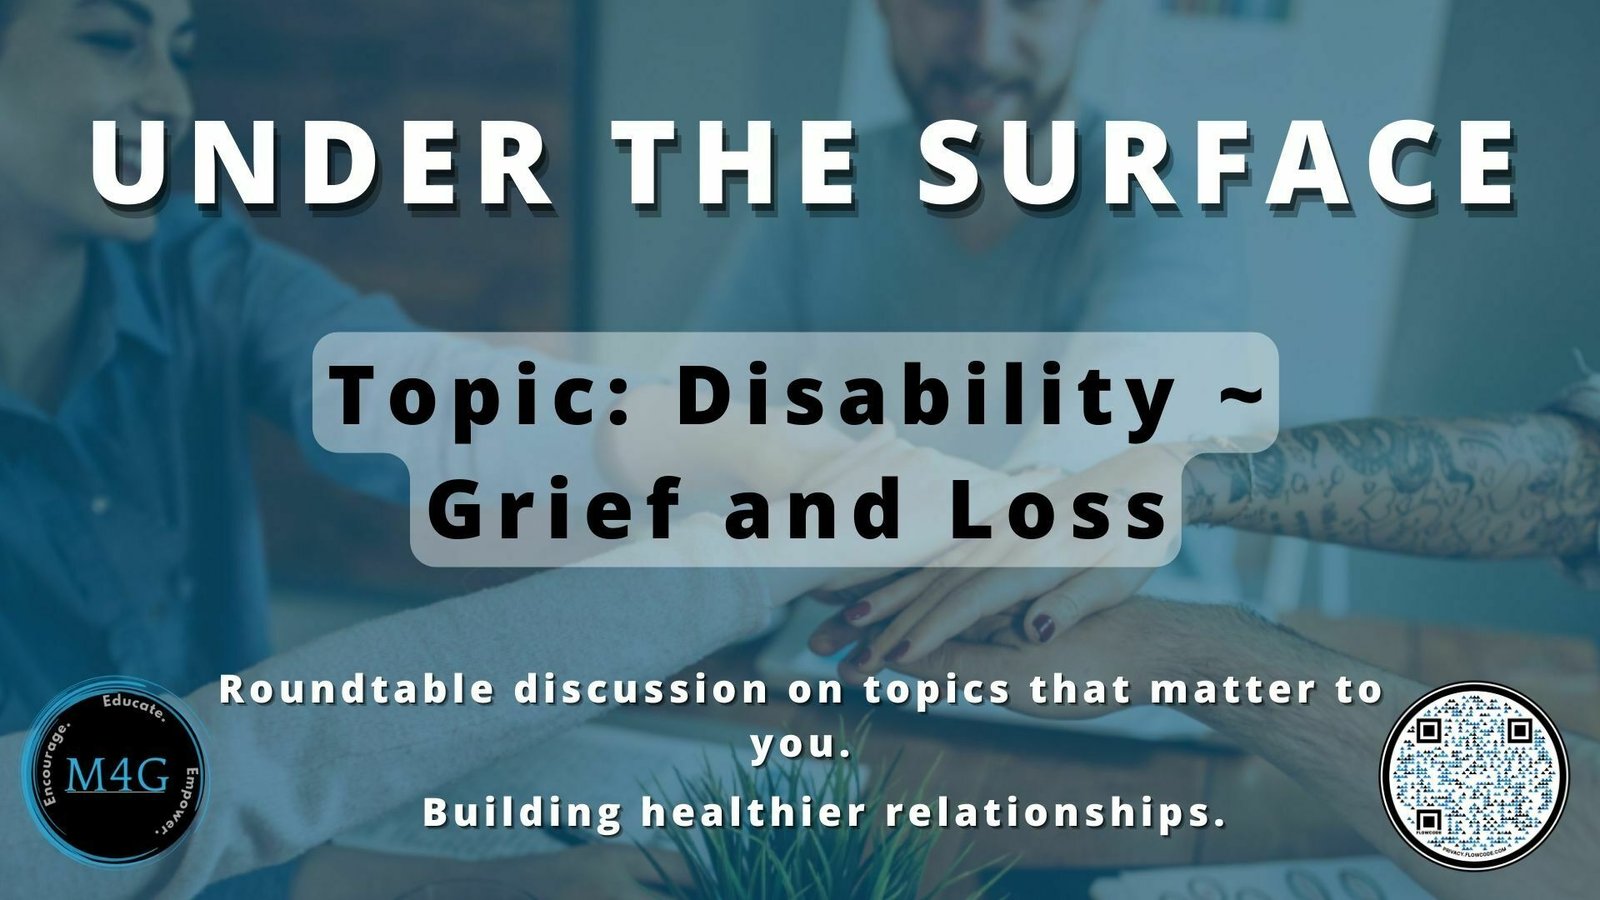 Under the Surface: Season 1, Episode 6 - Disability ~ Grief and Loss